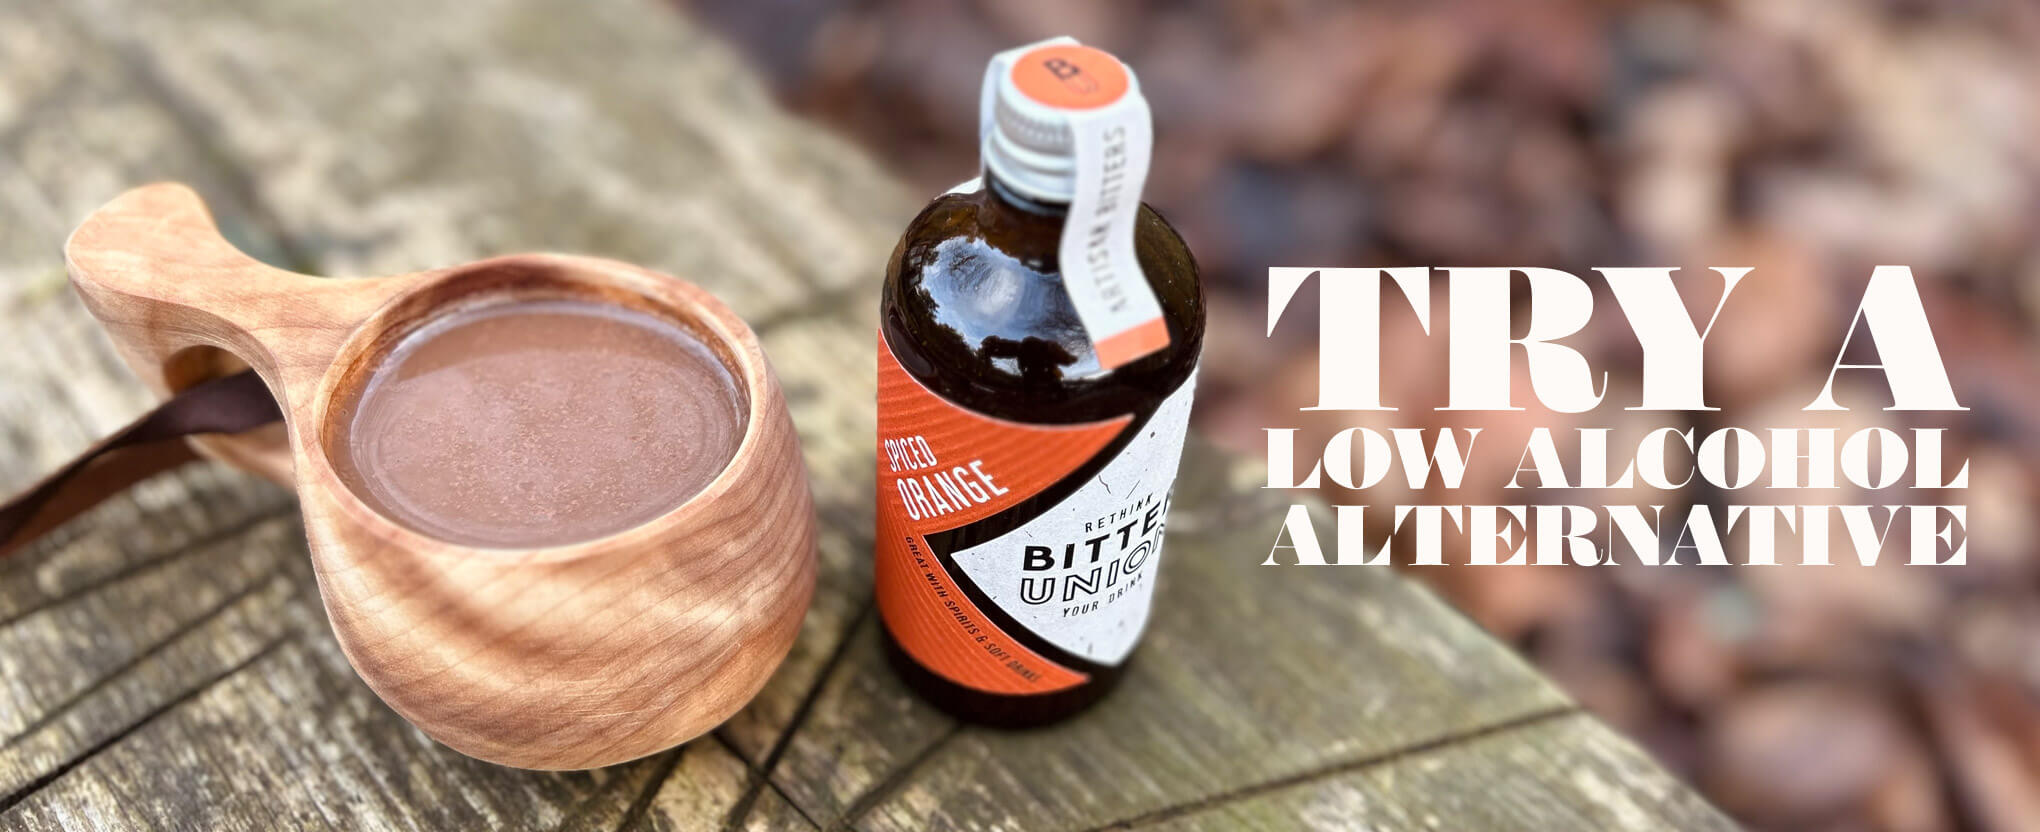 Bitter Union cocktail bitters – try a low alcohol alternative